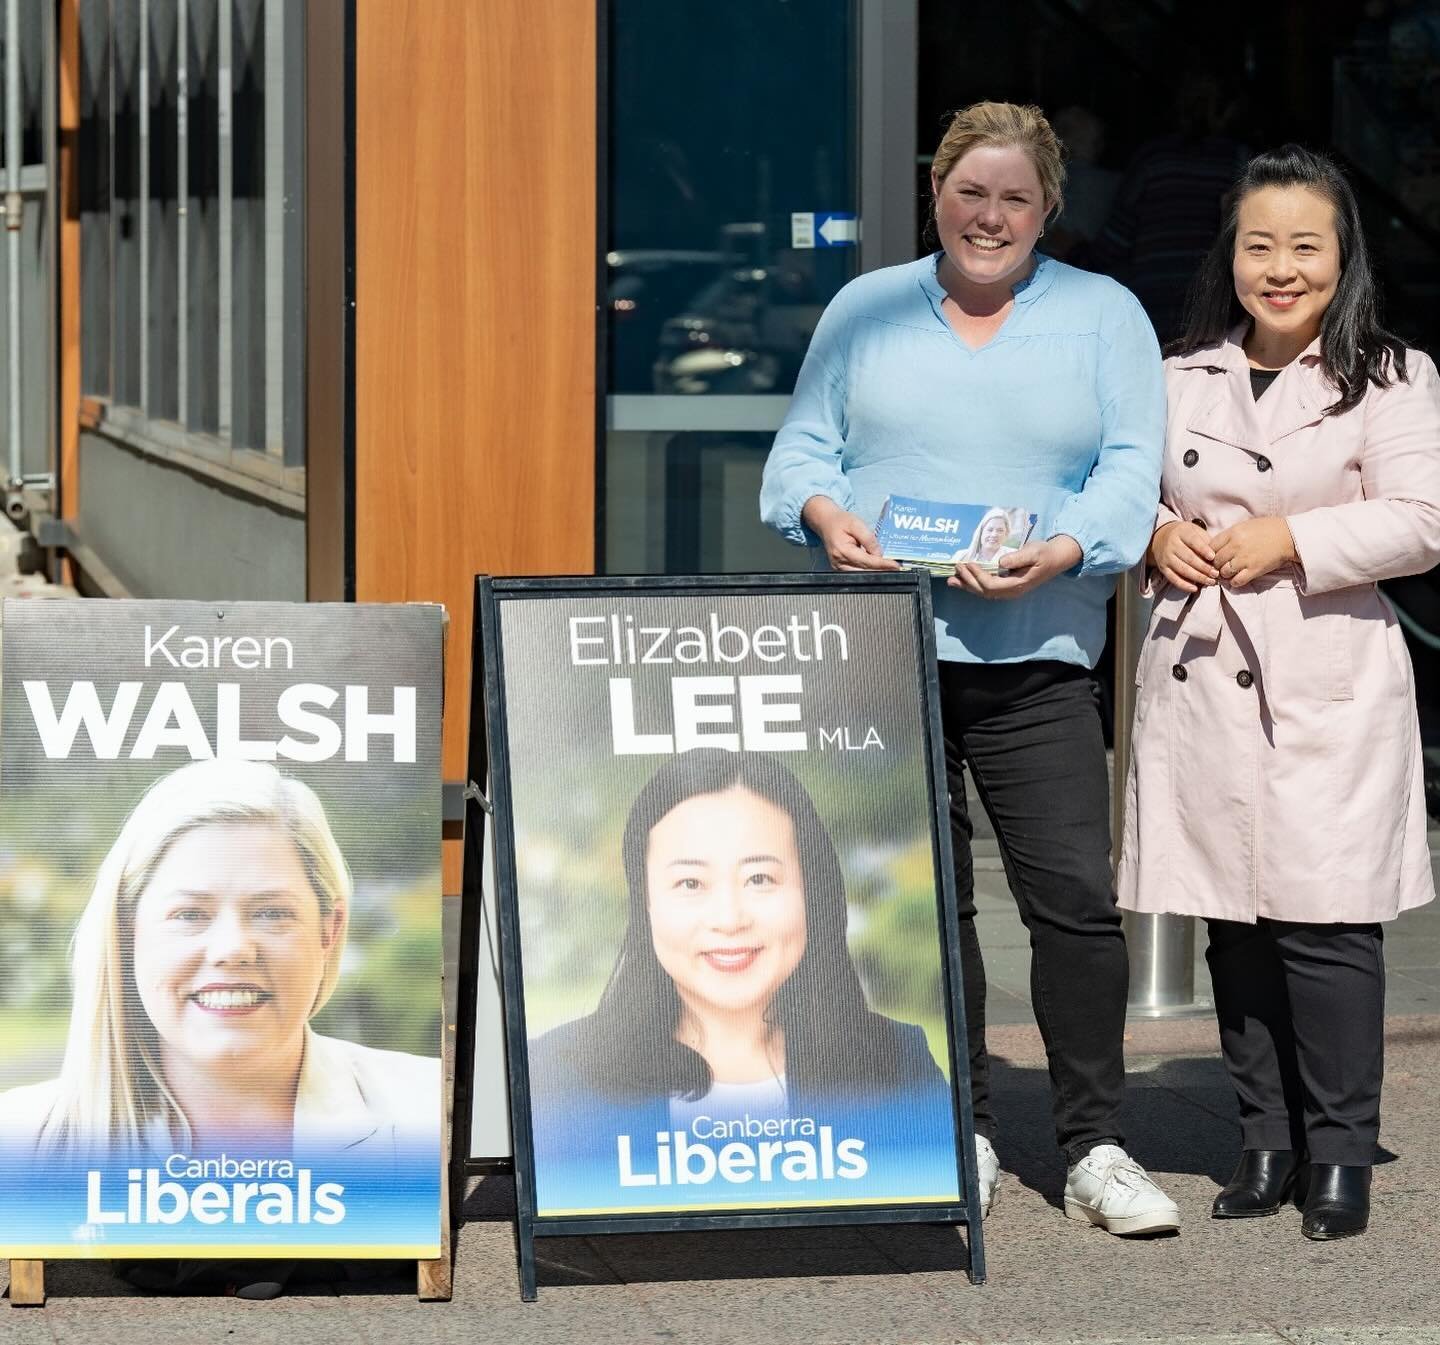 Karen Walsh, @canberraliberals candidate for Murrumbidgee is working incredibly hard across the electorate, listening to Canberrans who know this Labor-Greens government has left them behind, and spreading the positive plan that we have for a better 